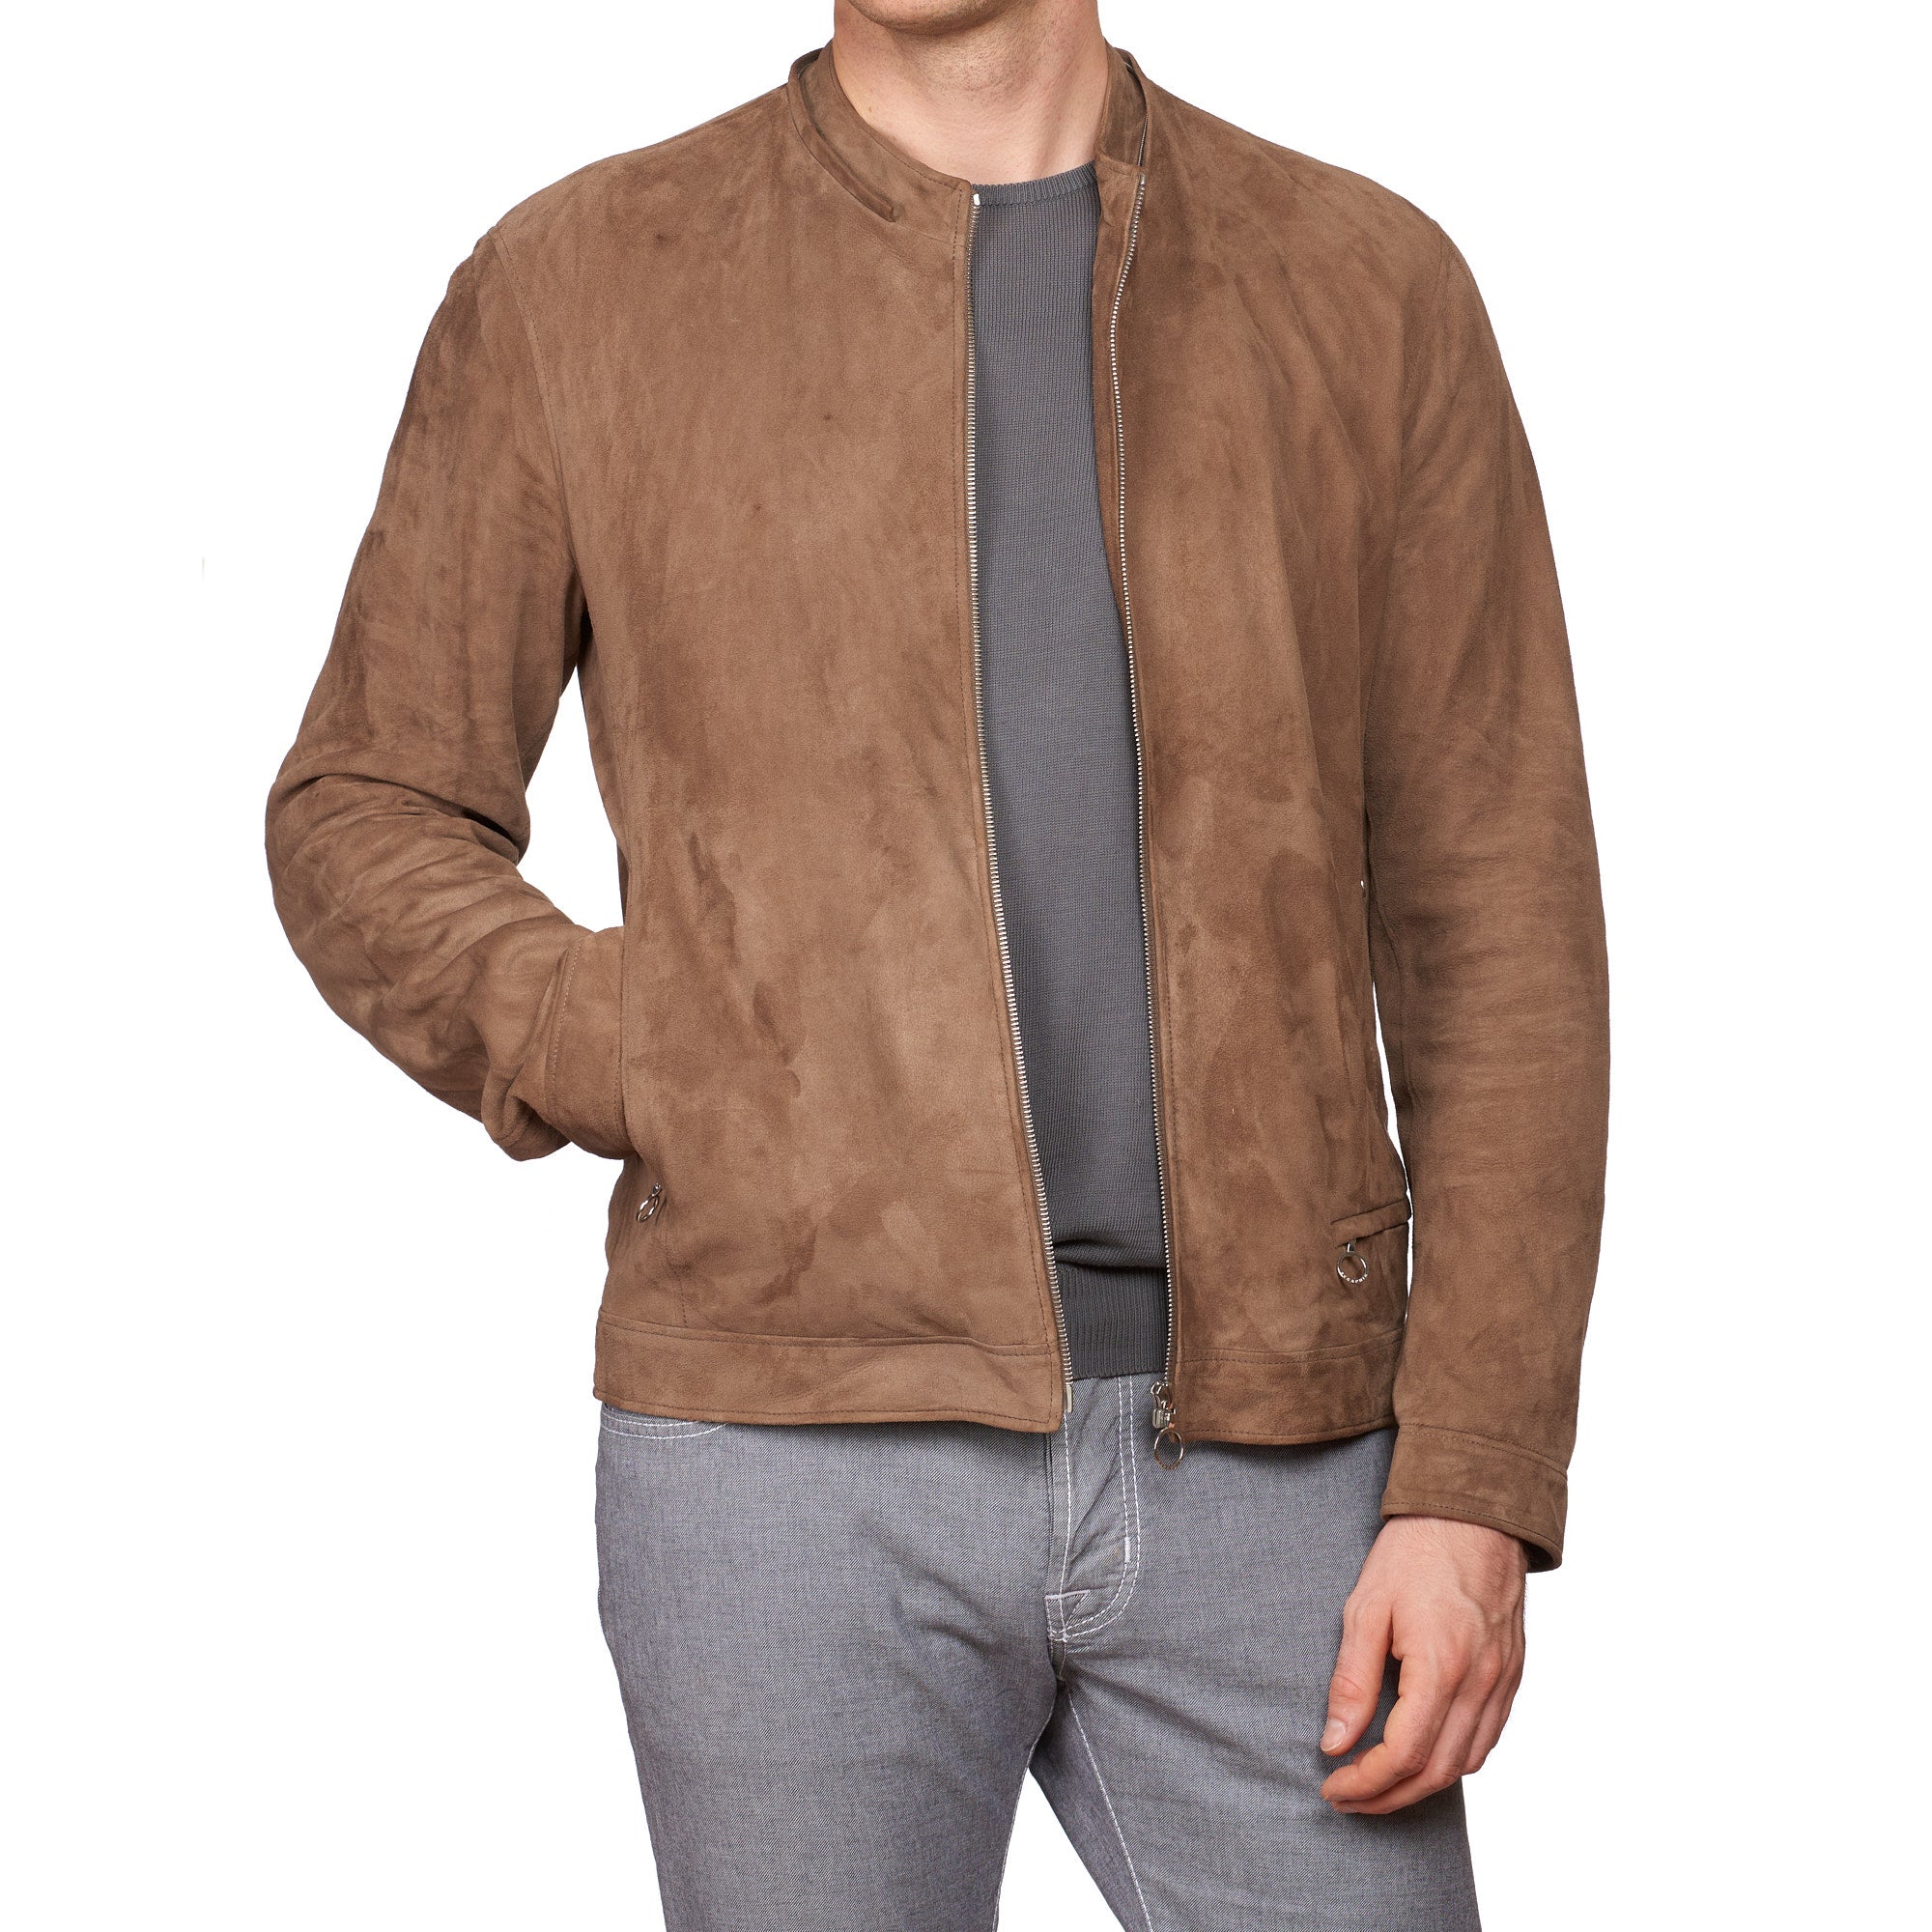 SERAPHIN Brown Suede Goat Leather Unlined Cafe Racer Biker Jacket FR 50 US M SERAPHIN